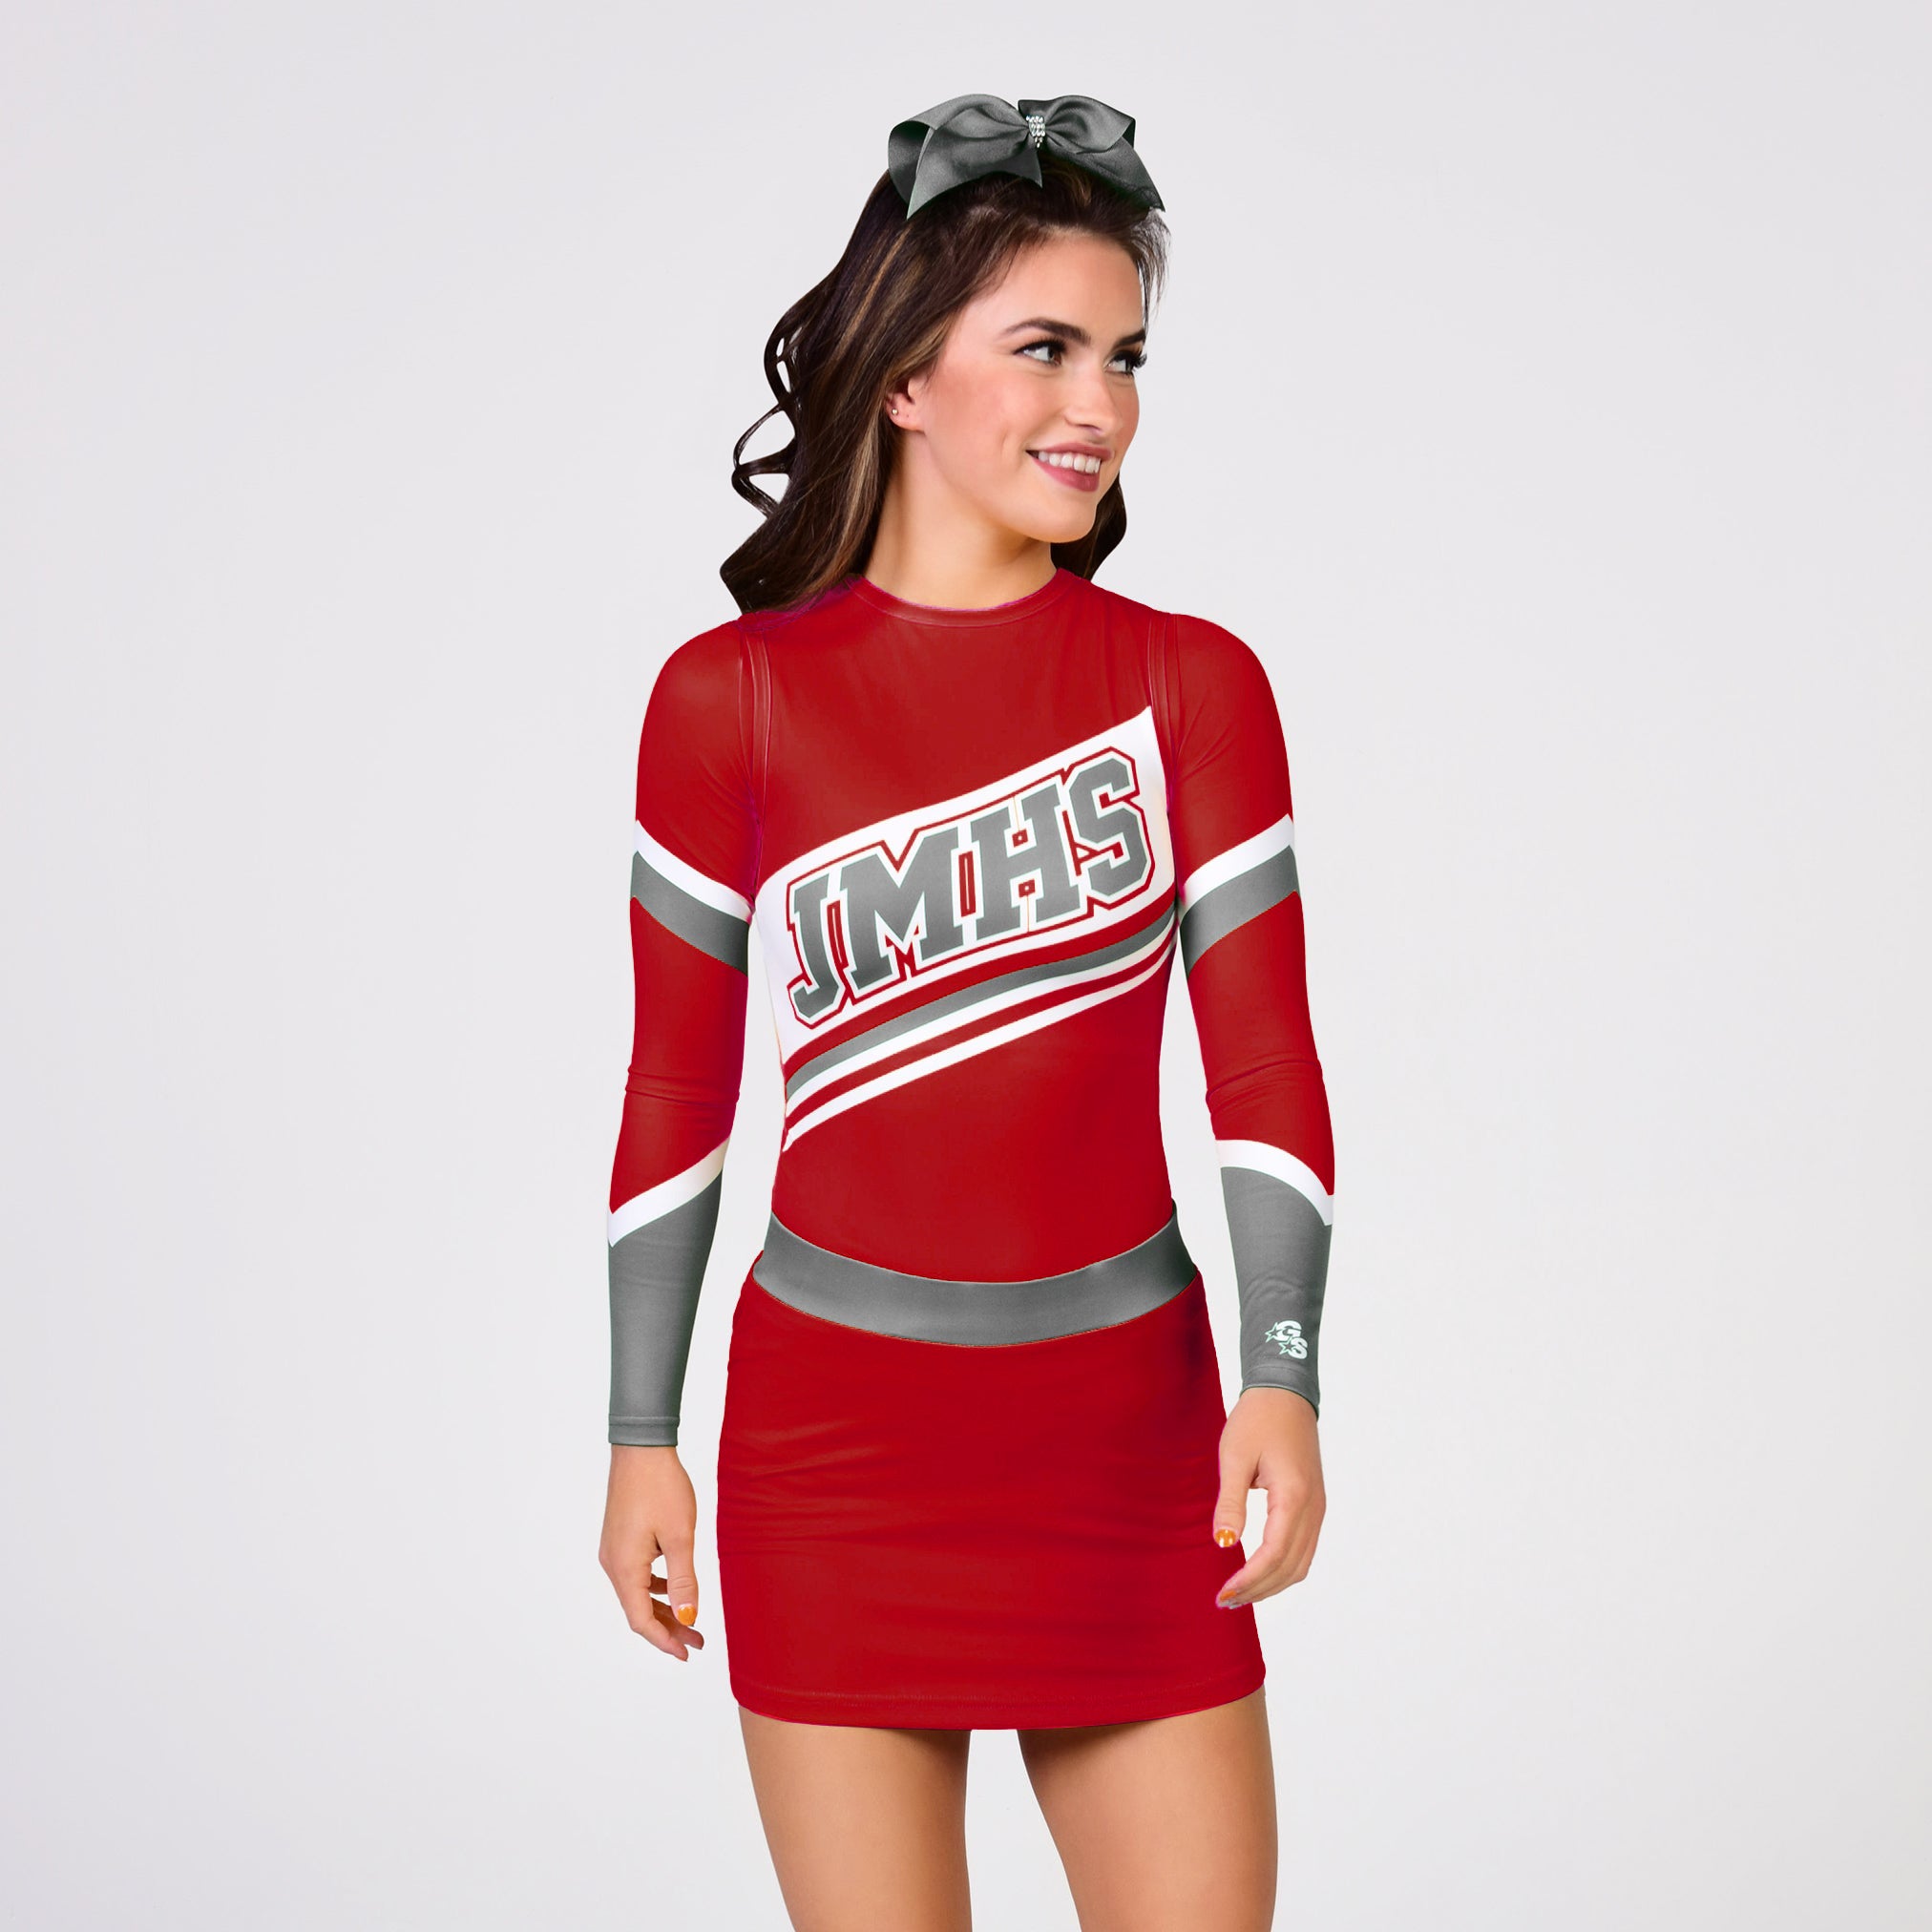 Long Sleeve Sublimated Gameday Uniform - Red